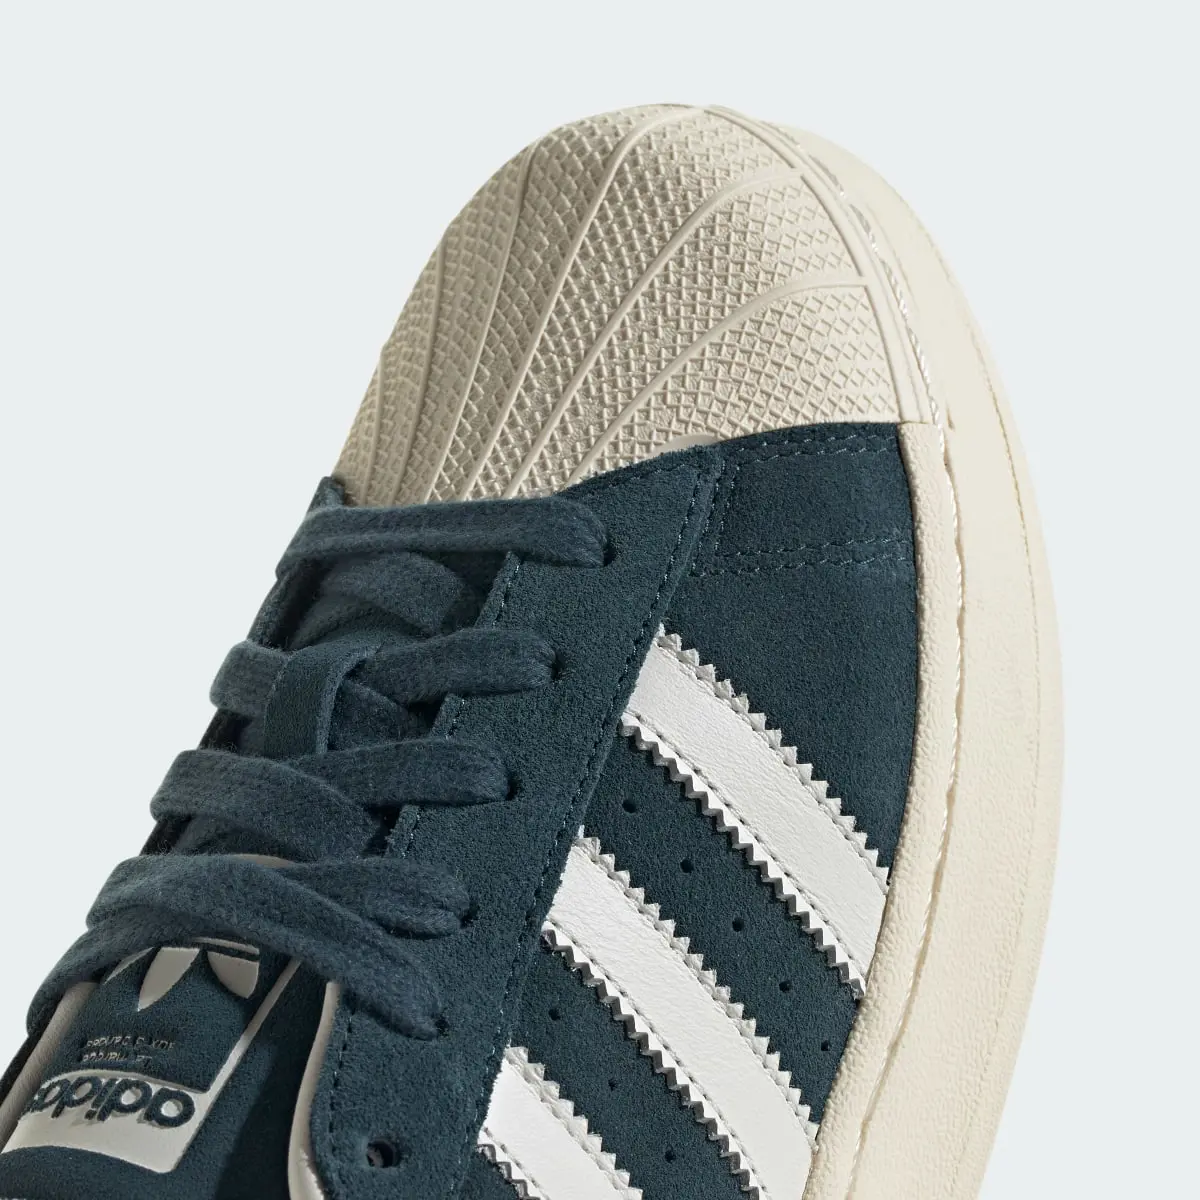 Adidas Superstar XLG Shoes. 3